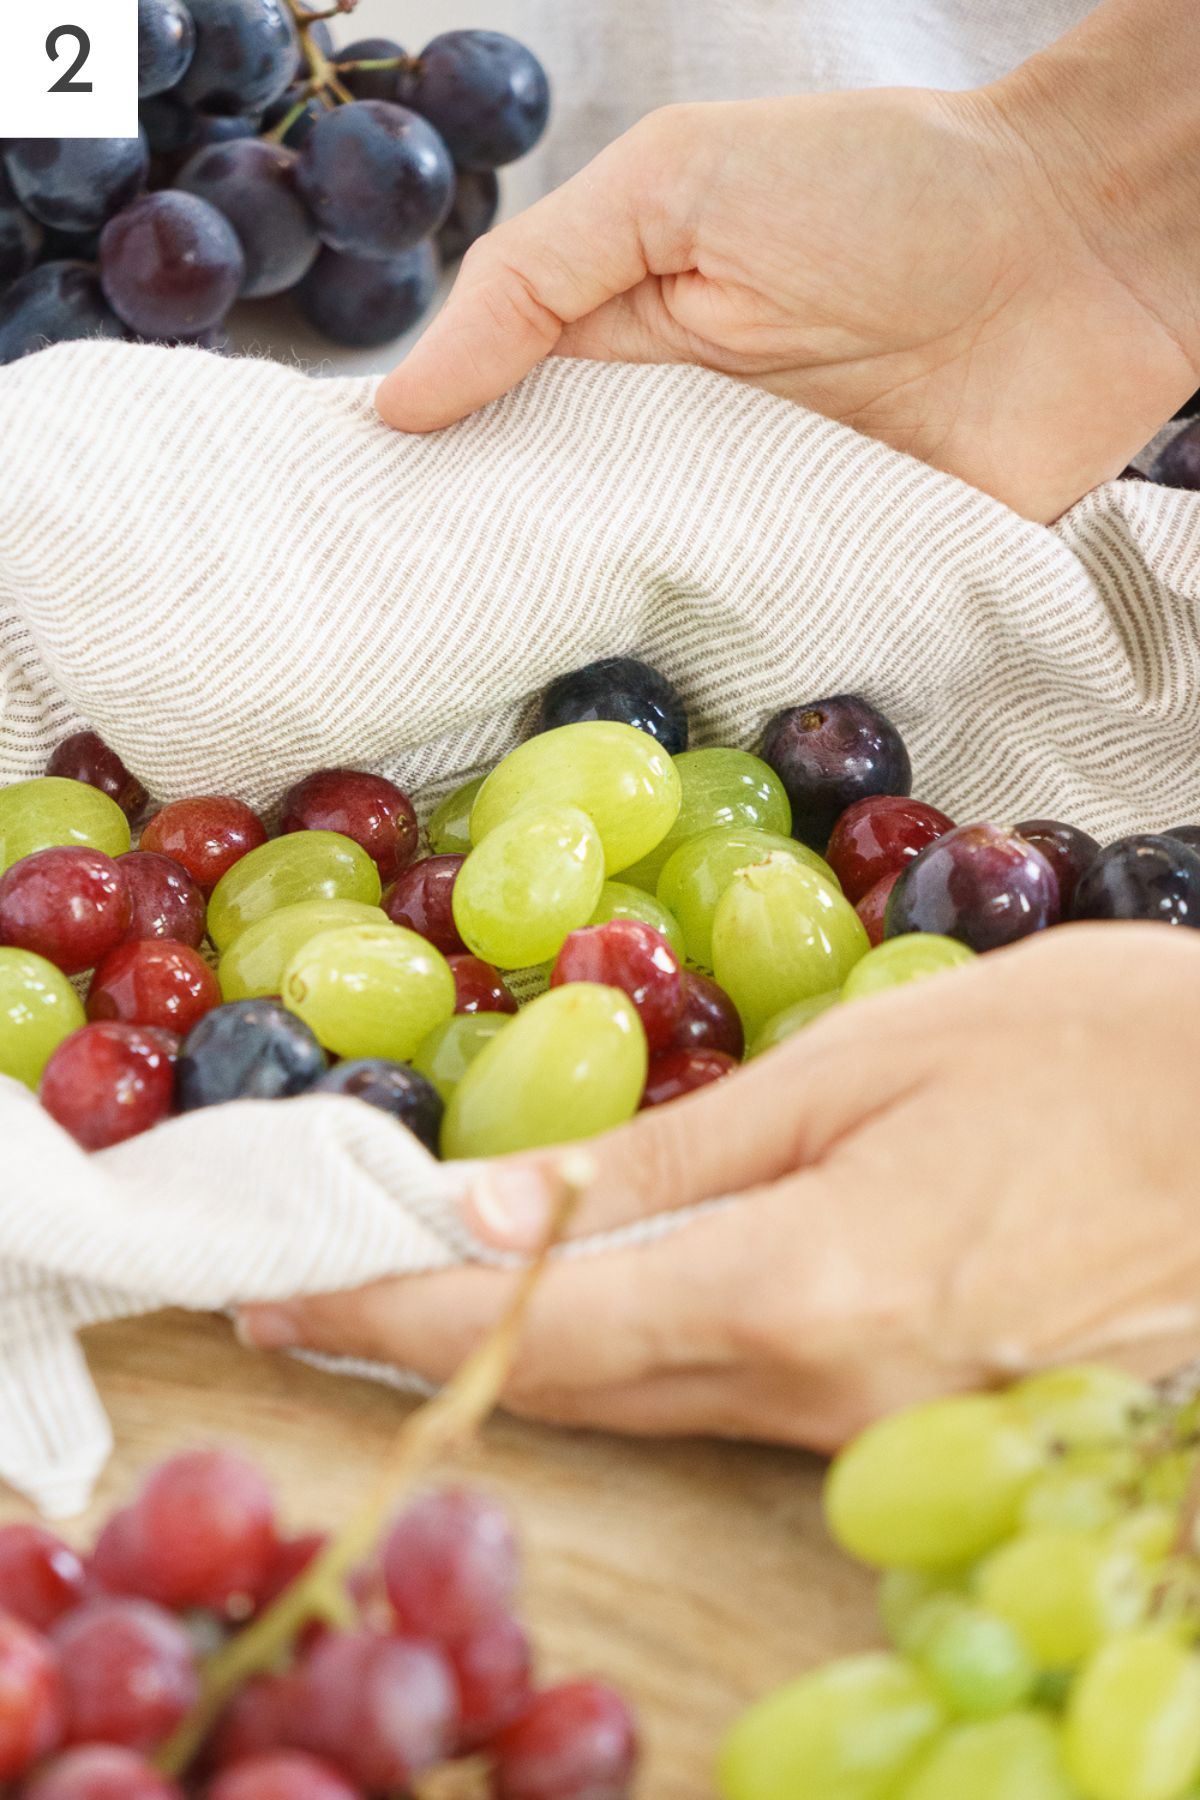 Hands patting dry freshly washed grapes with a kitchen towel.